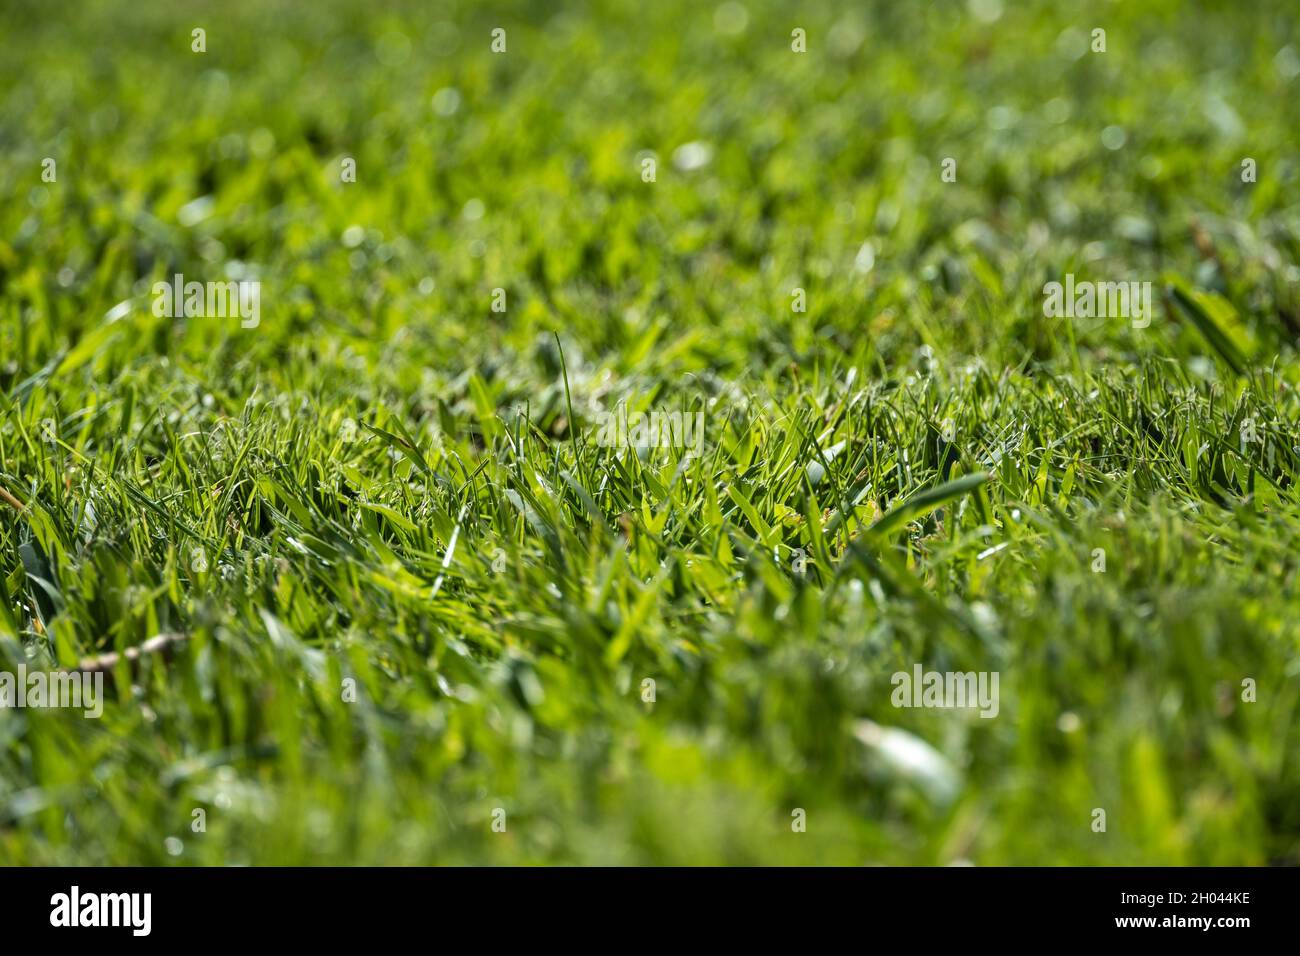 Close up of lush green grass lawn Stock Photo